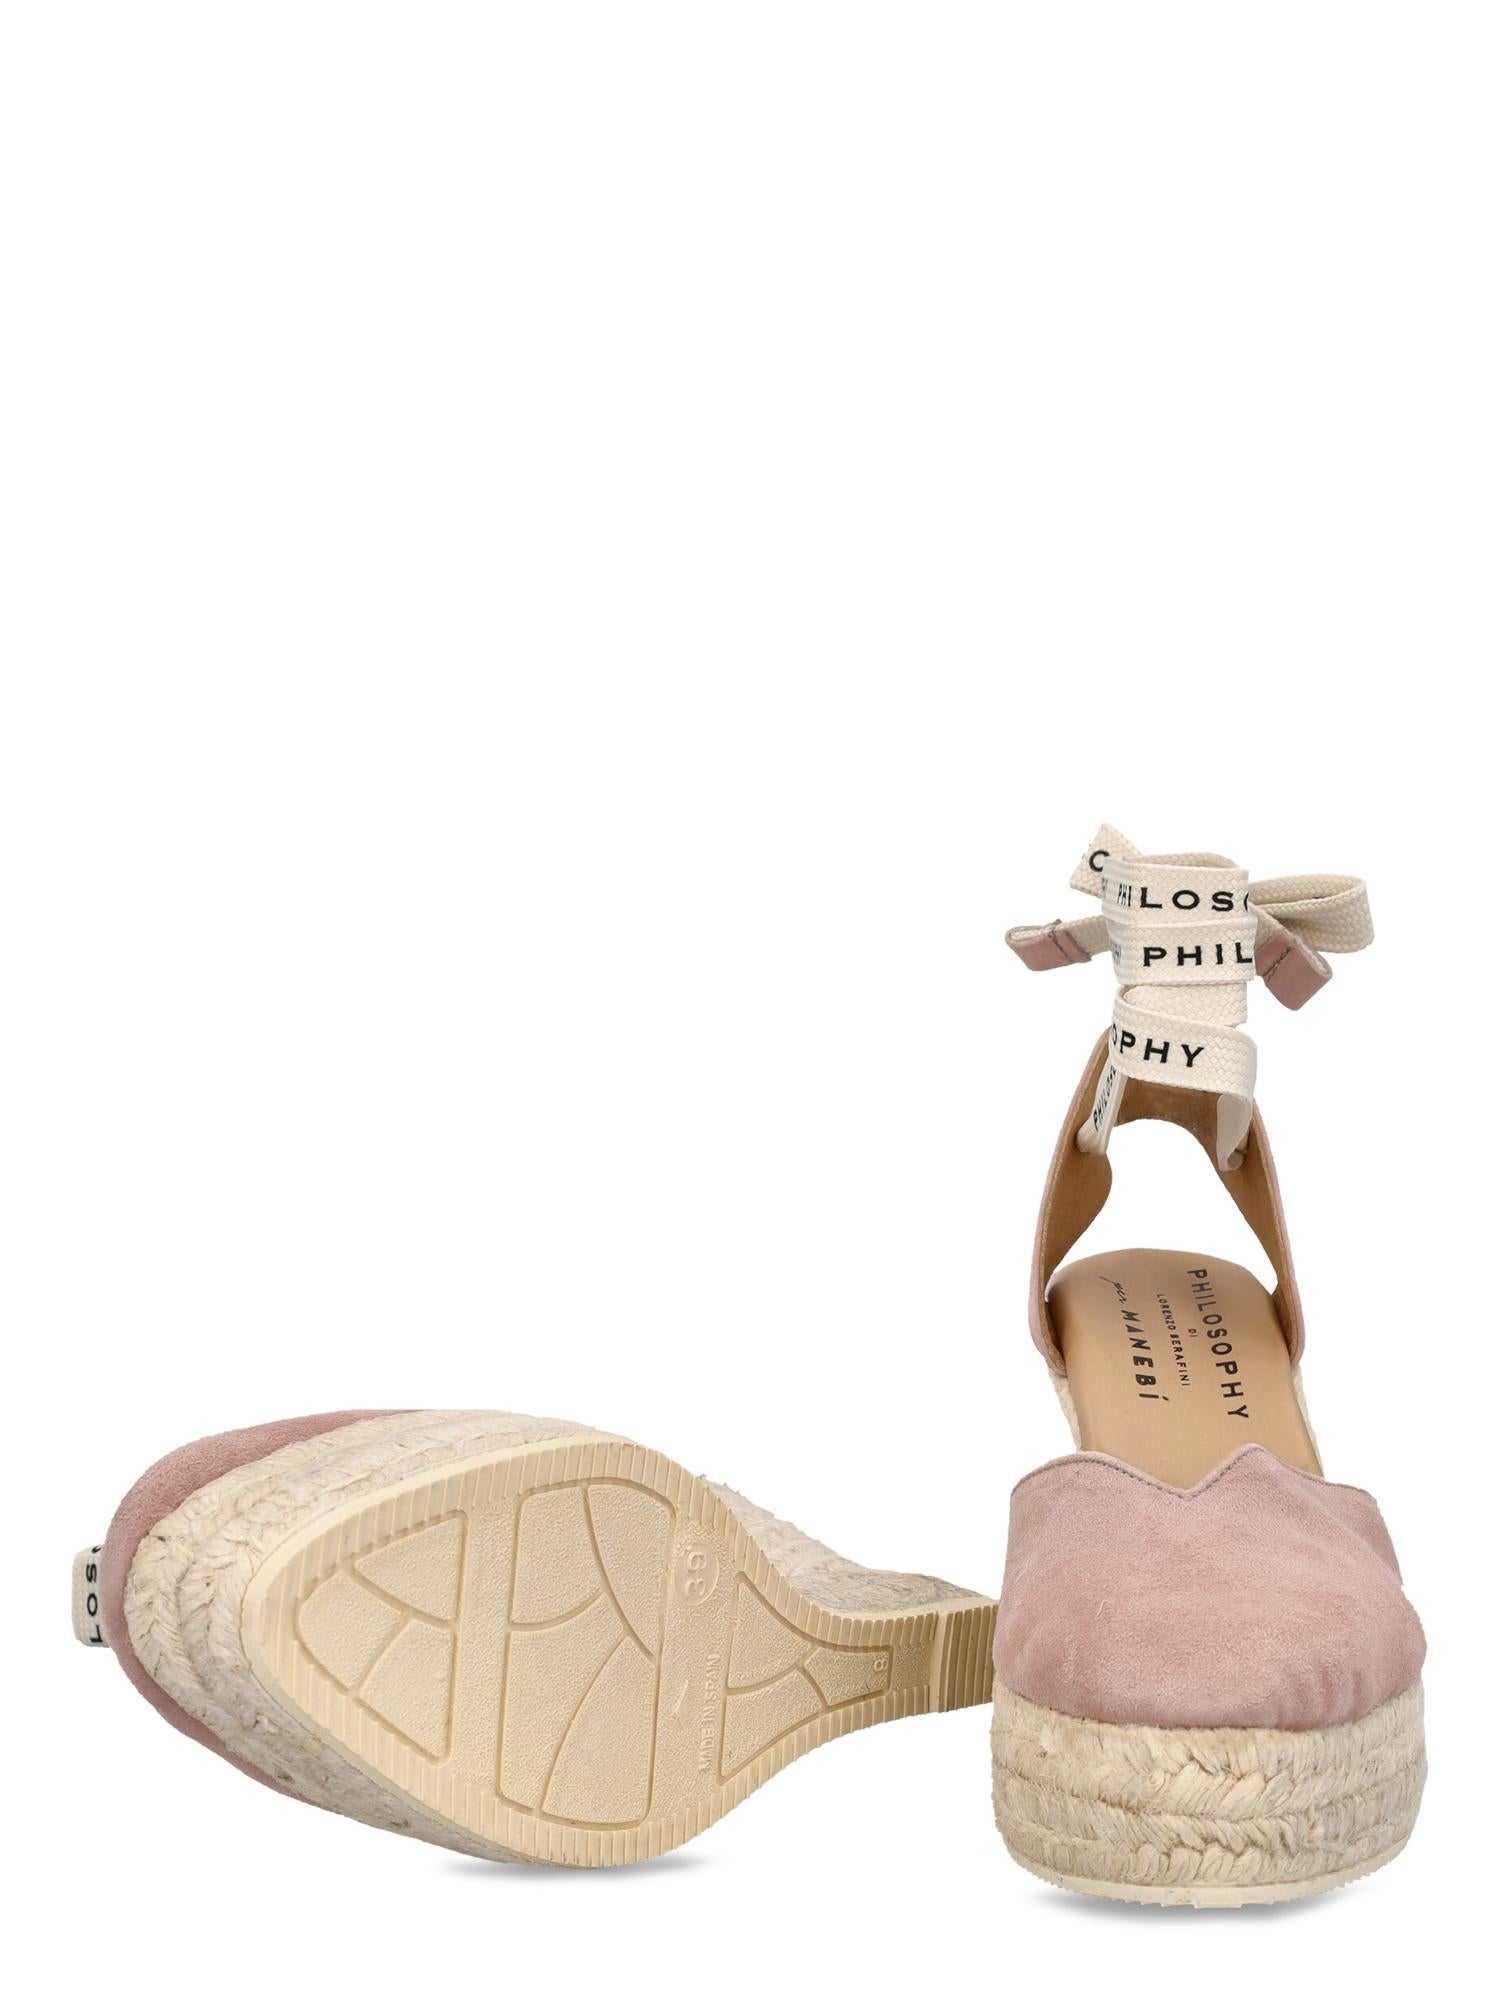 Philosophy Women Espadrillas Pink Leather EU 39 In Excellent Condition For Sale In Milan, IT